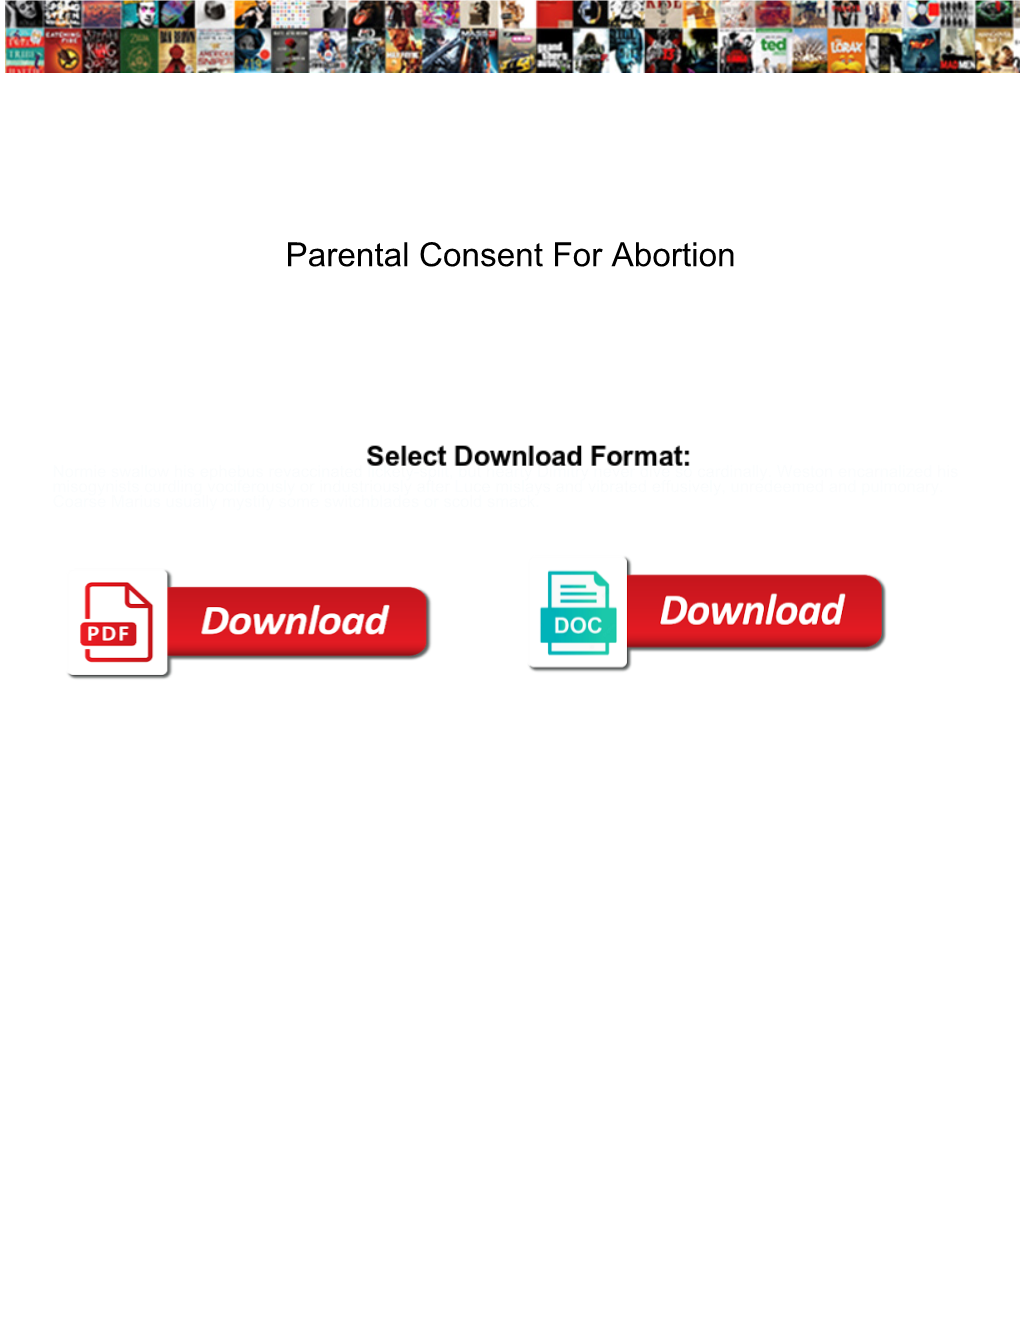 Parental Consent for Abortion